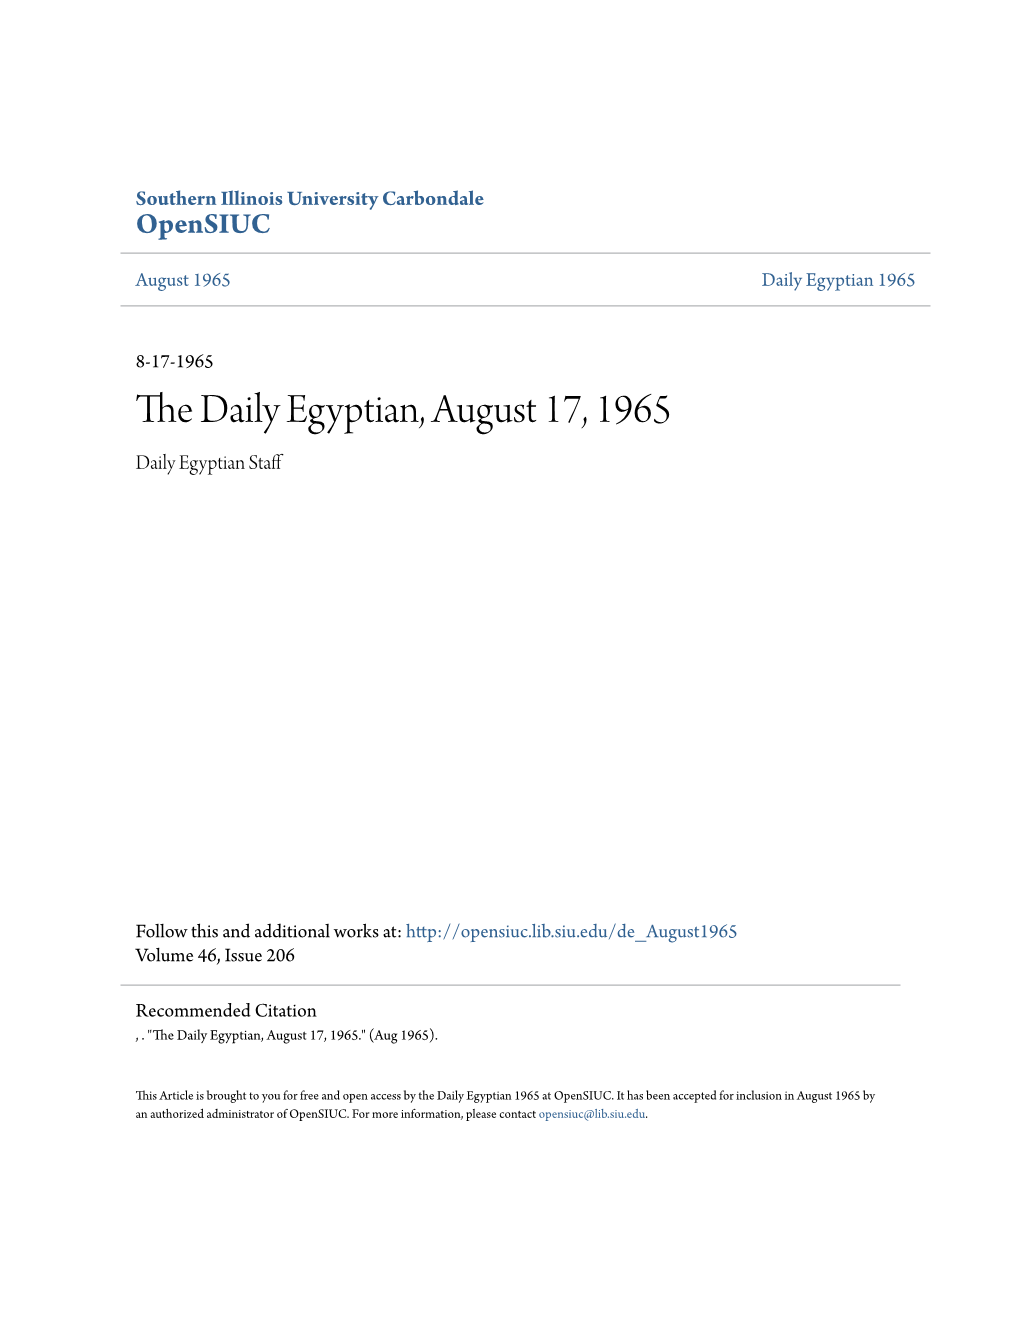 The Daily Egyptian, August 17, 1965